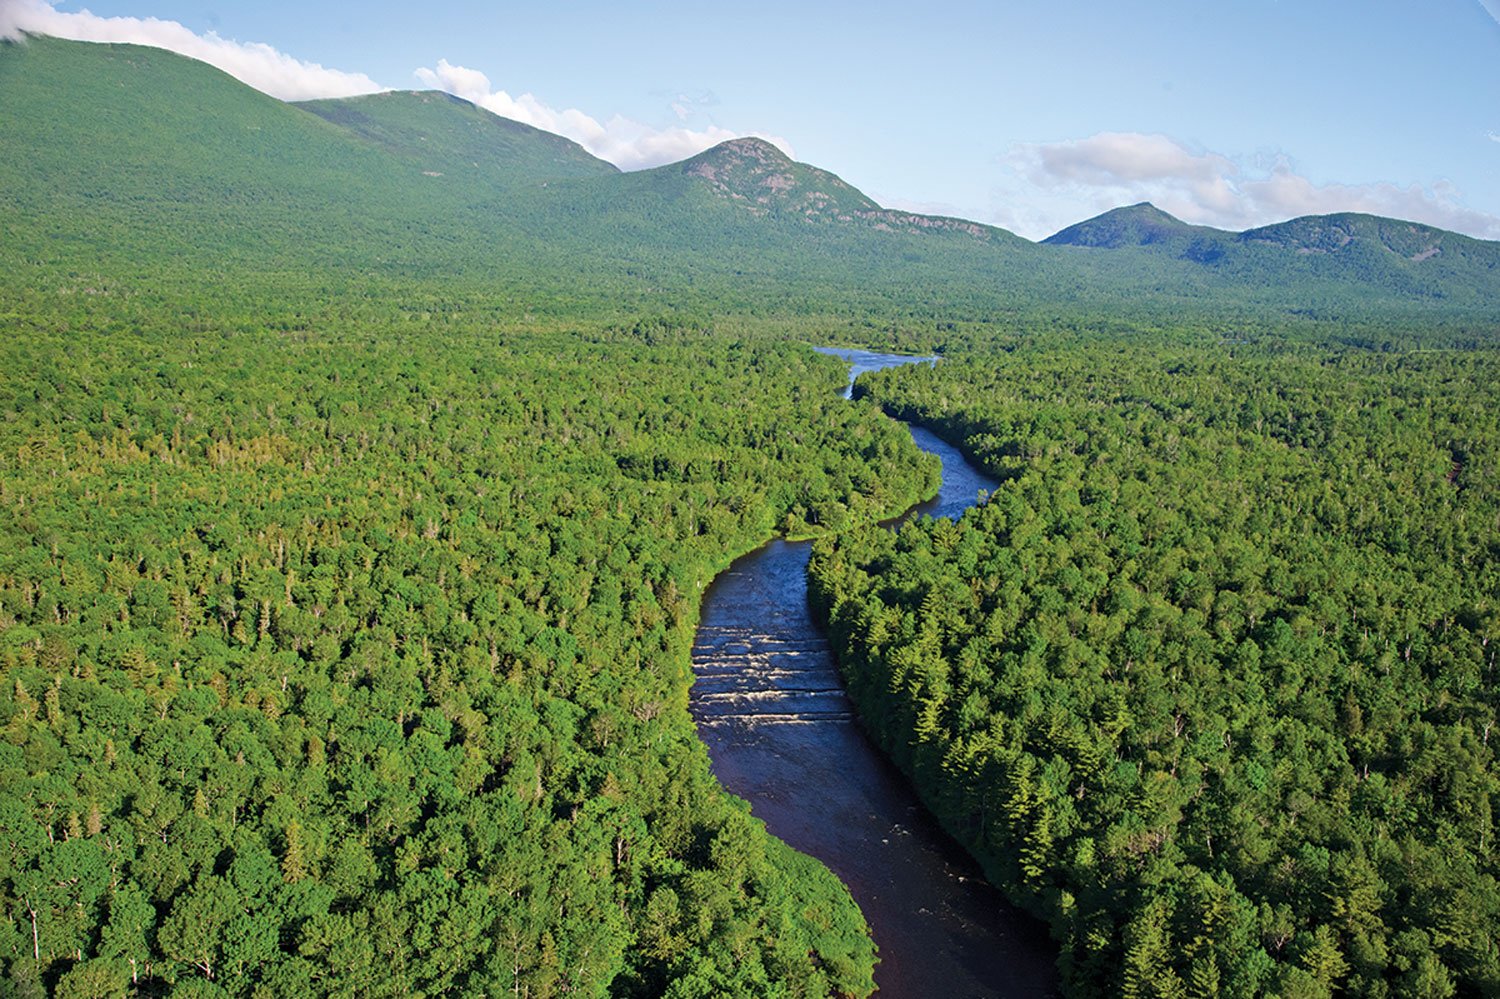 Katahdin-Woods-and-Waters-National-Monument-(Photo-by-Mark-Picard).jpg